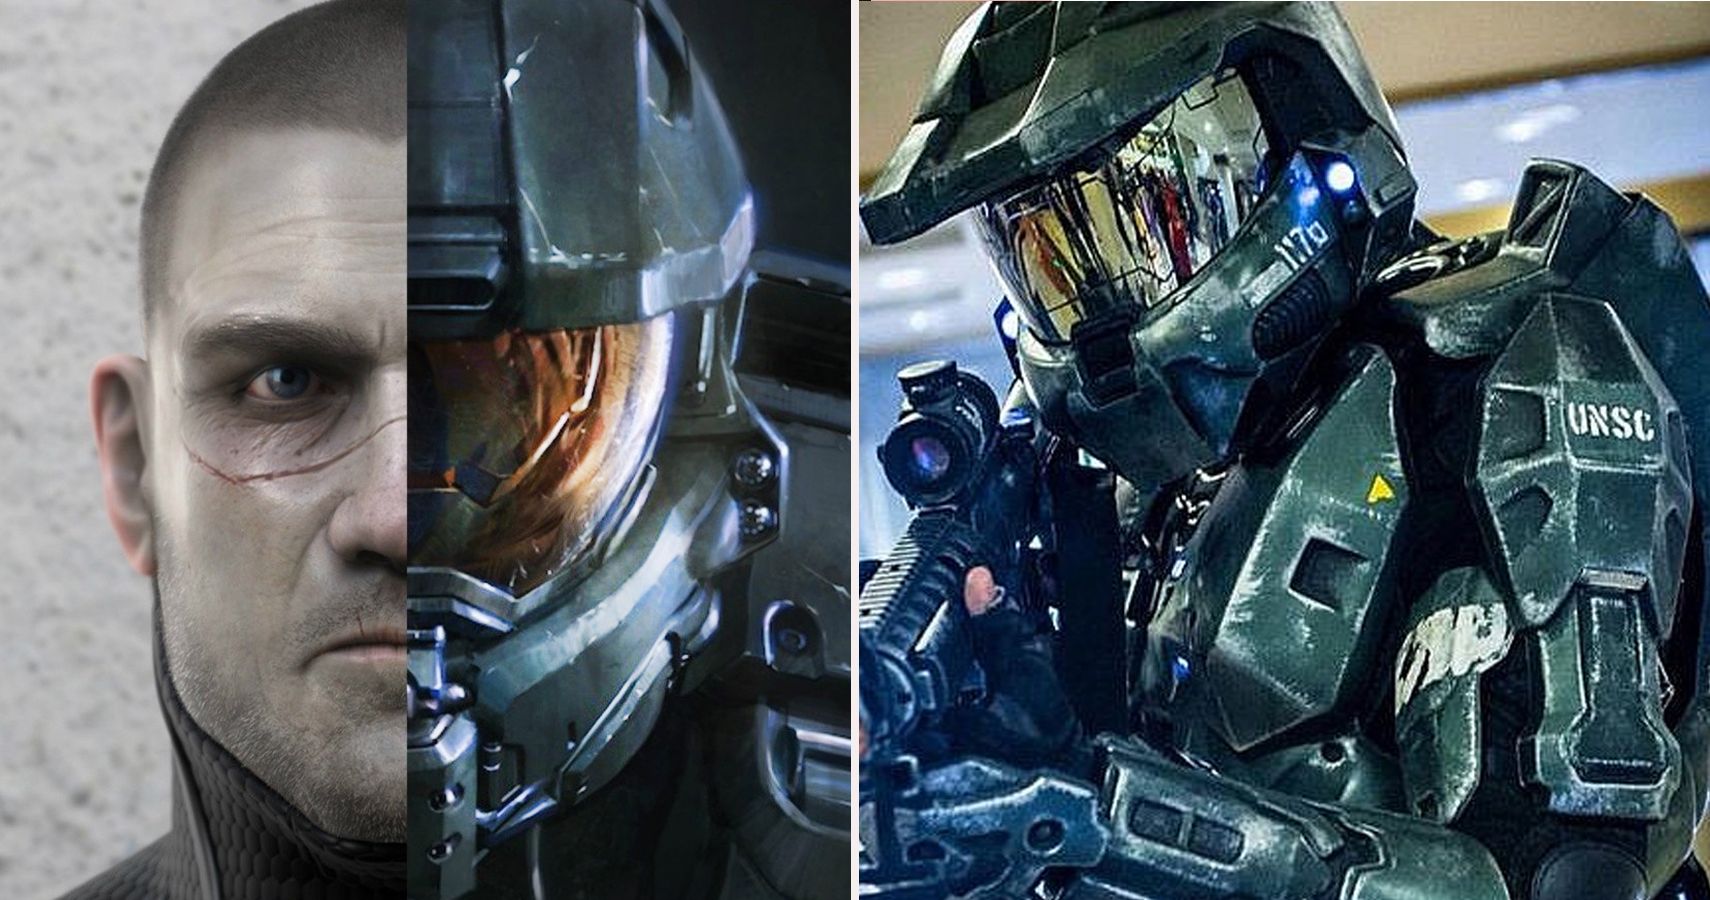 This put pressure on Halo to find the right person to play Master Chief esp...